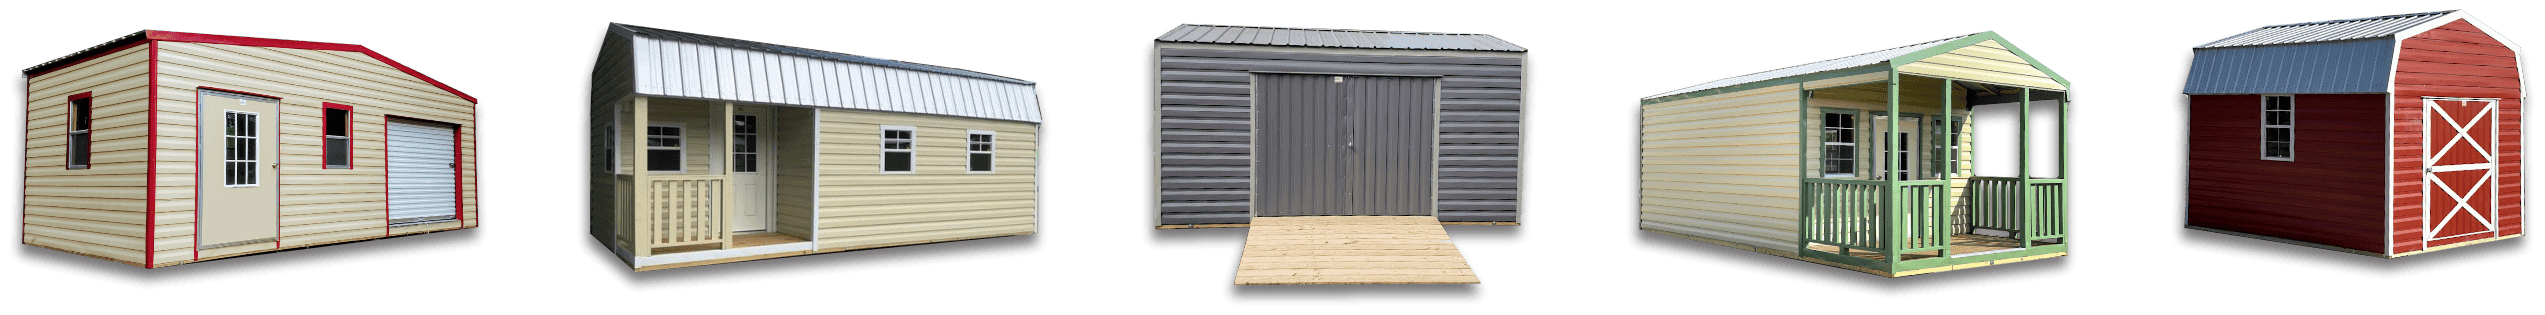 Find Your Perfect 14x16 Portable Building or Storage Shed at Robin Sheds - Top Shed Dealer Offering Quality Outdoor Storage Buildings. Explore the Best Shed Styles for Sale Now!